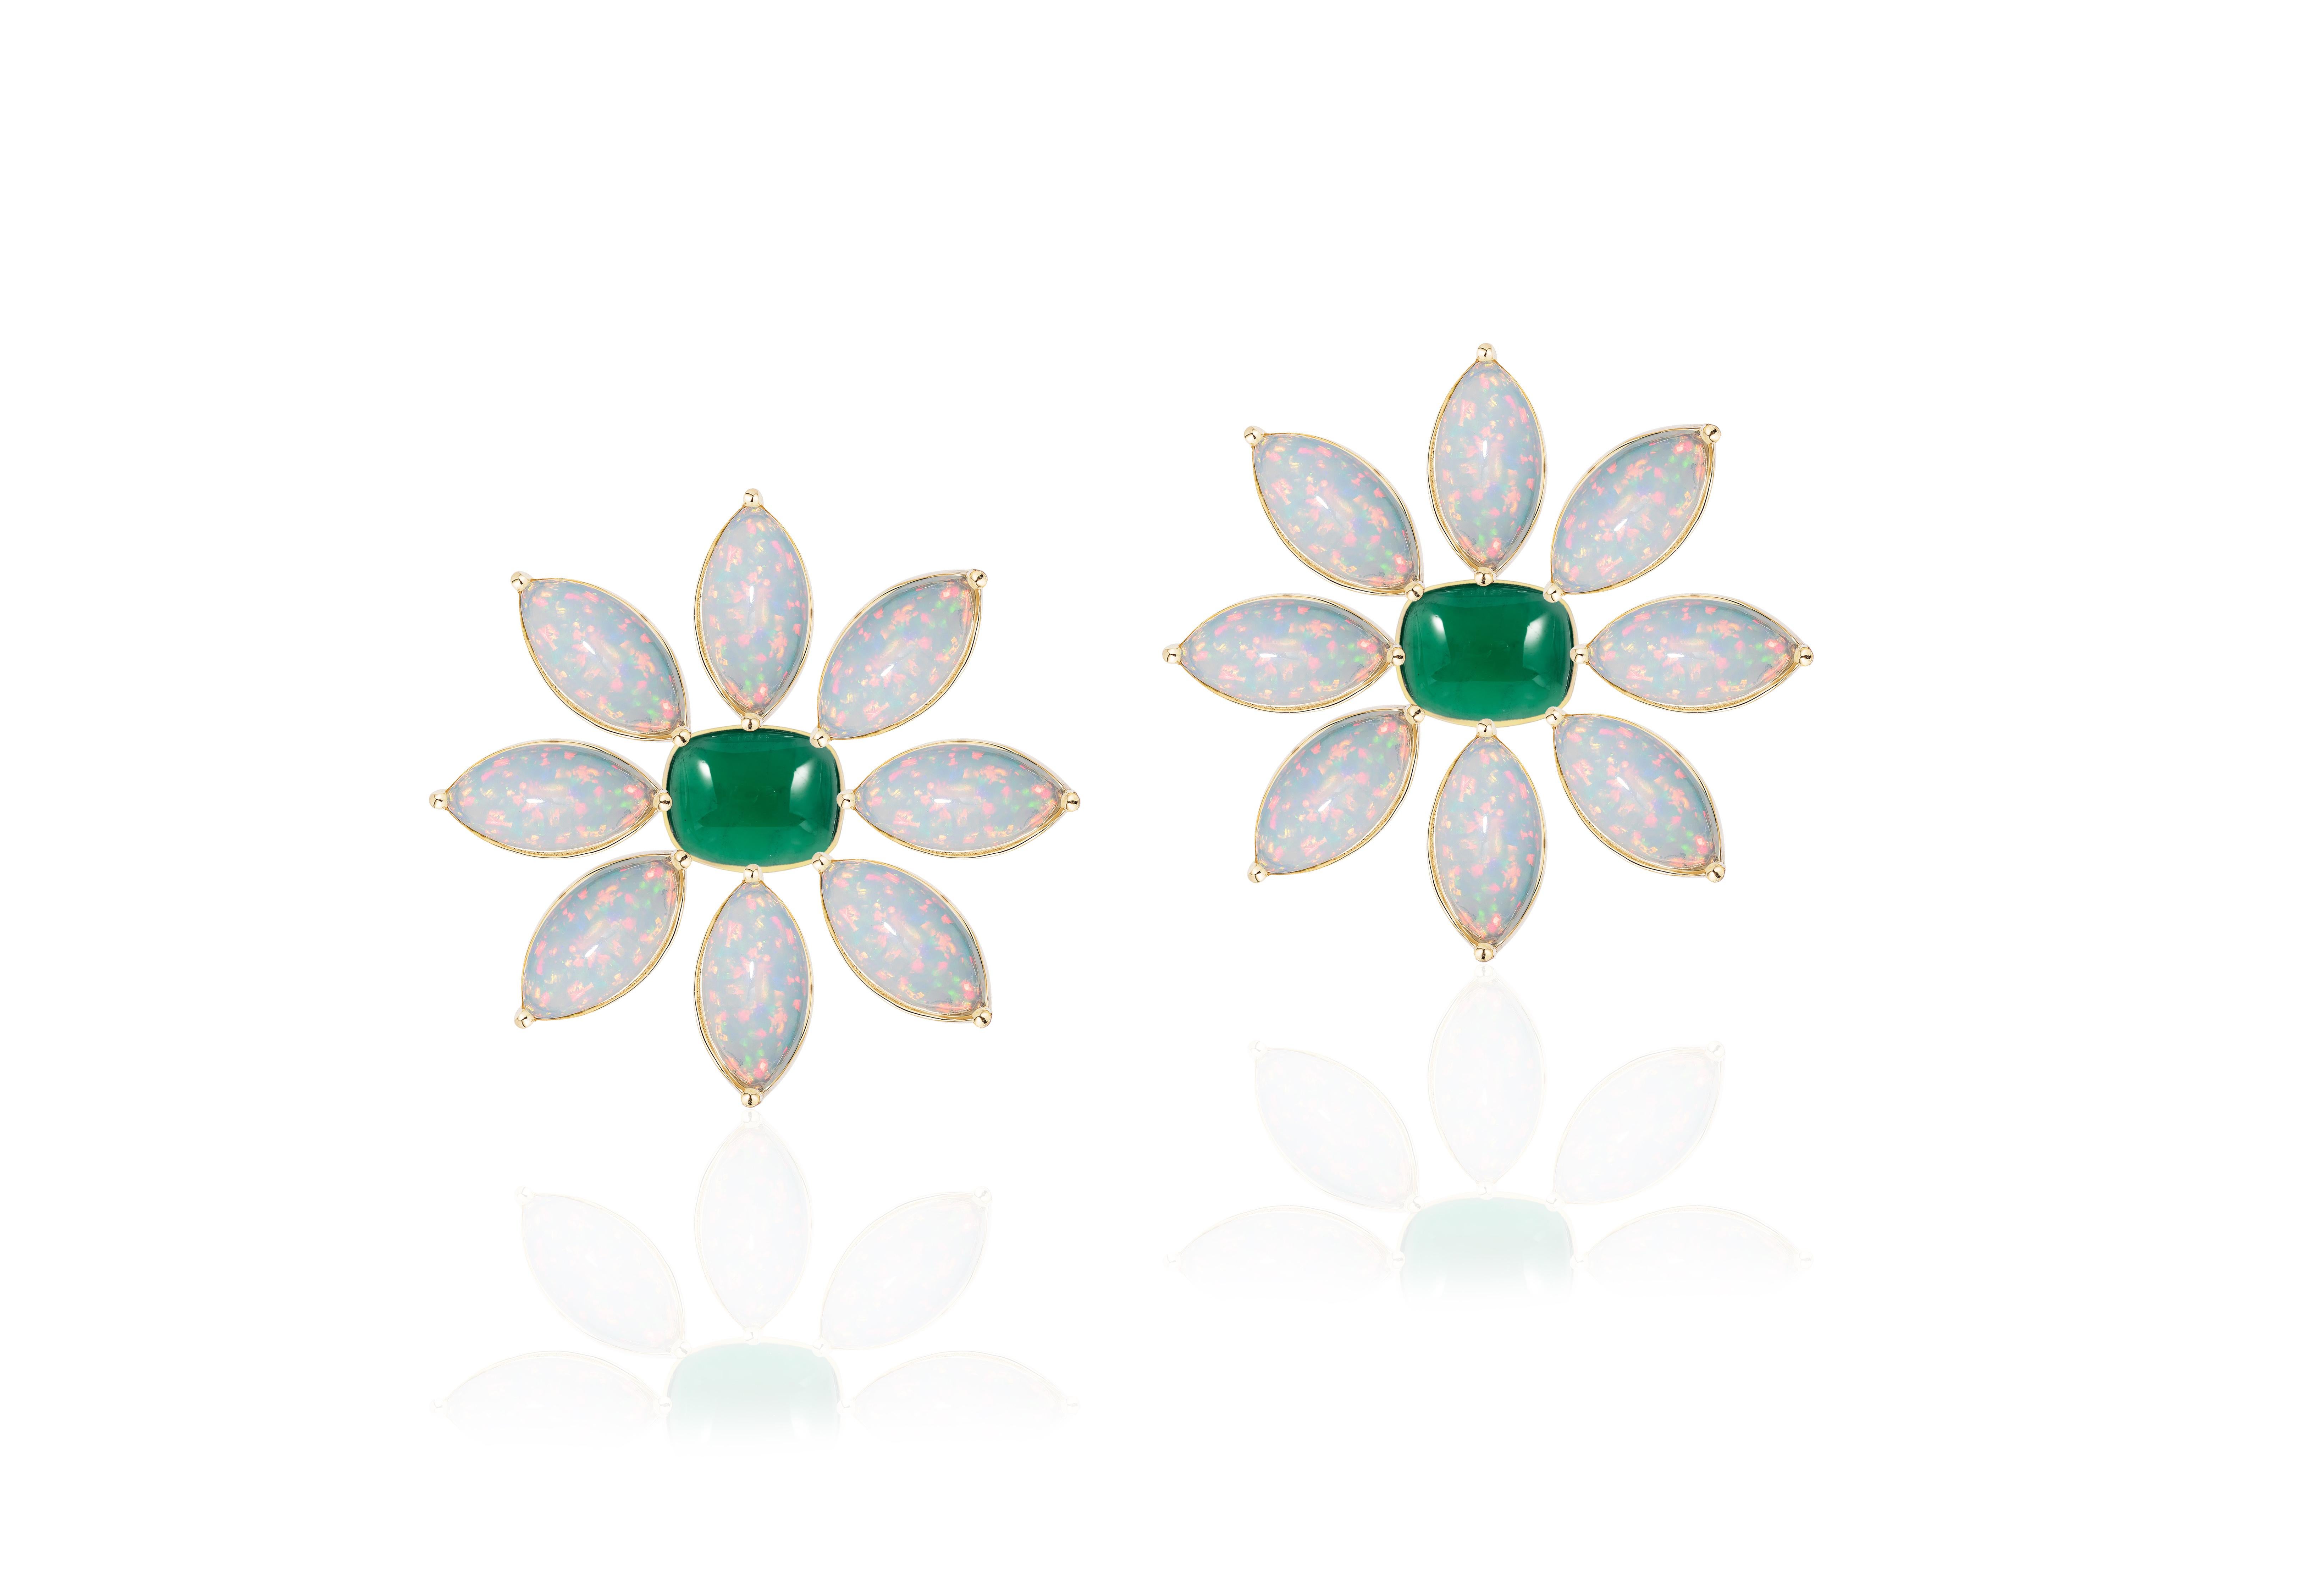 Contemporary Goshwara Emerald Cushion Cab and Marquise Opal Earrings